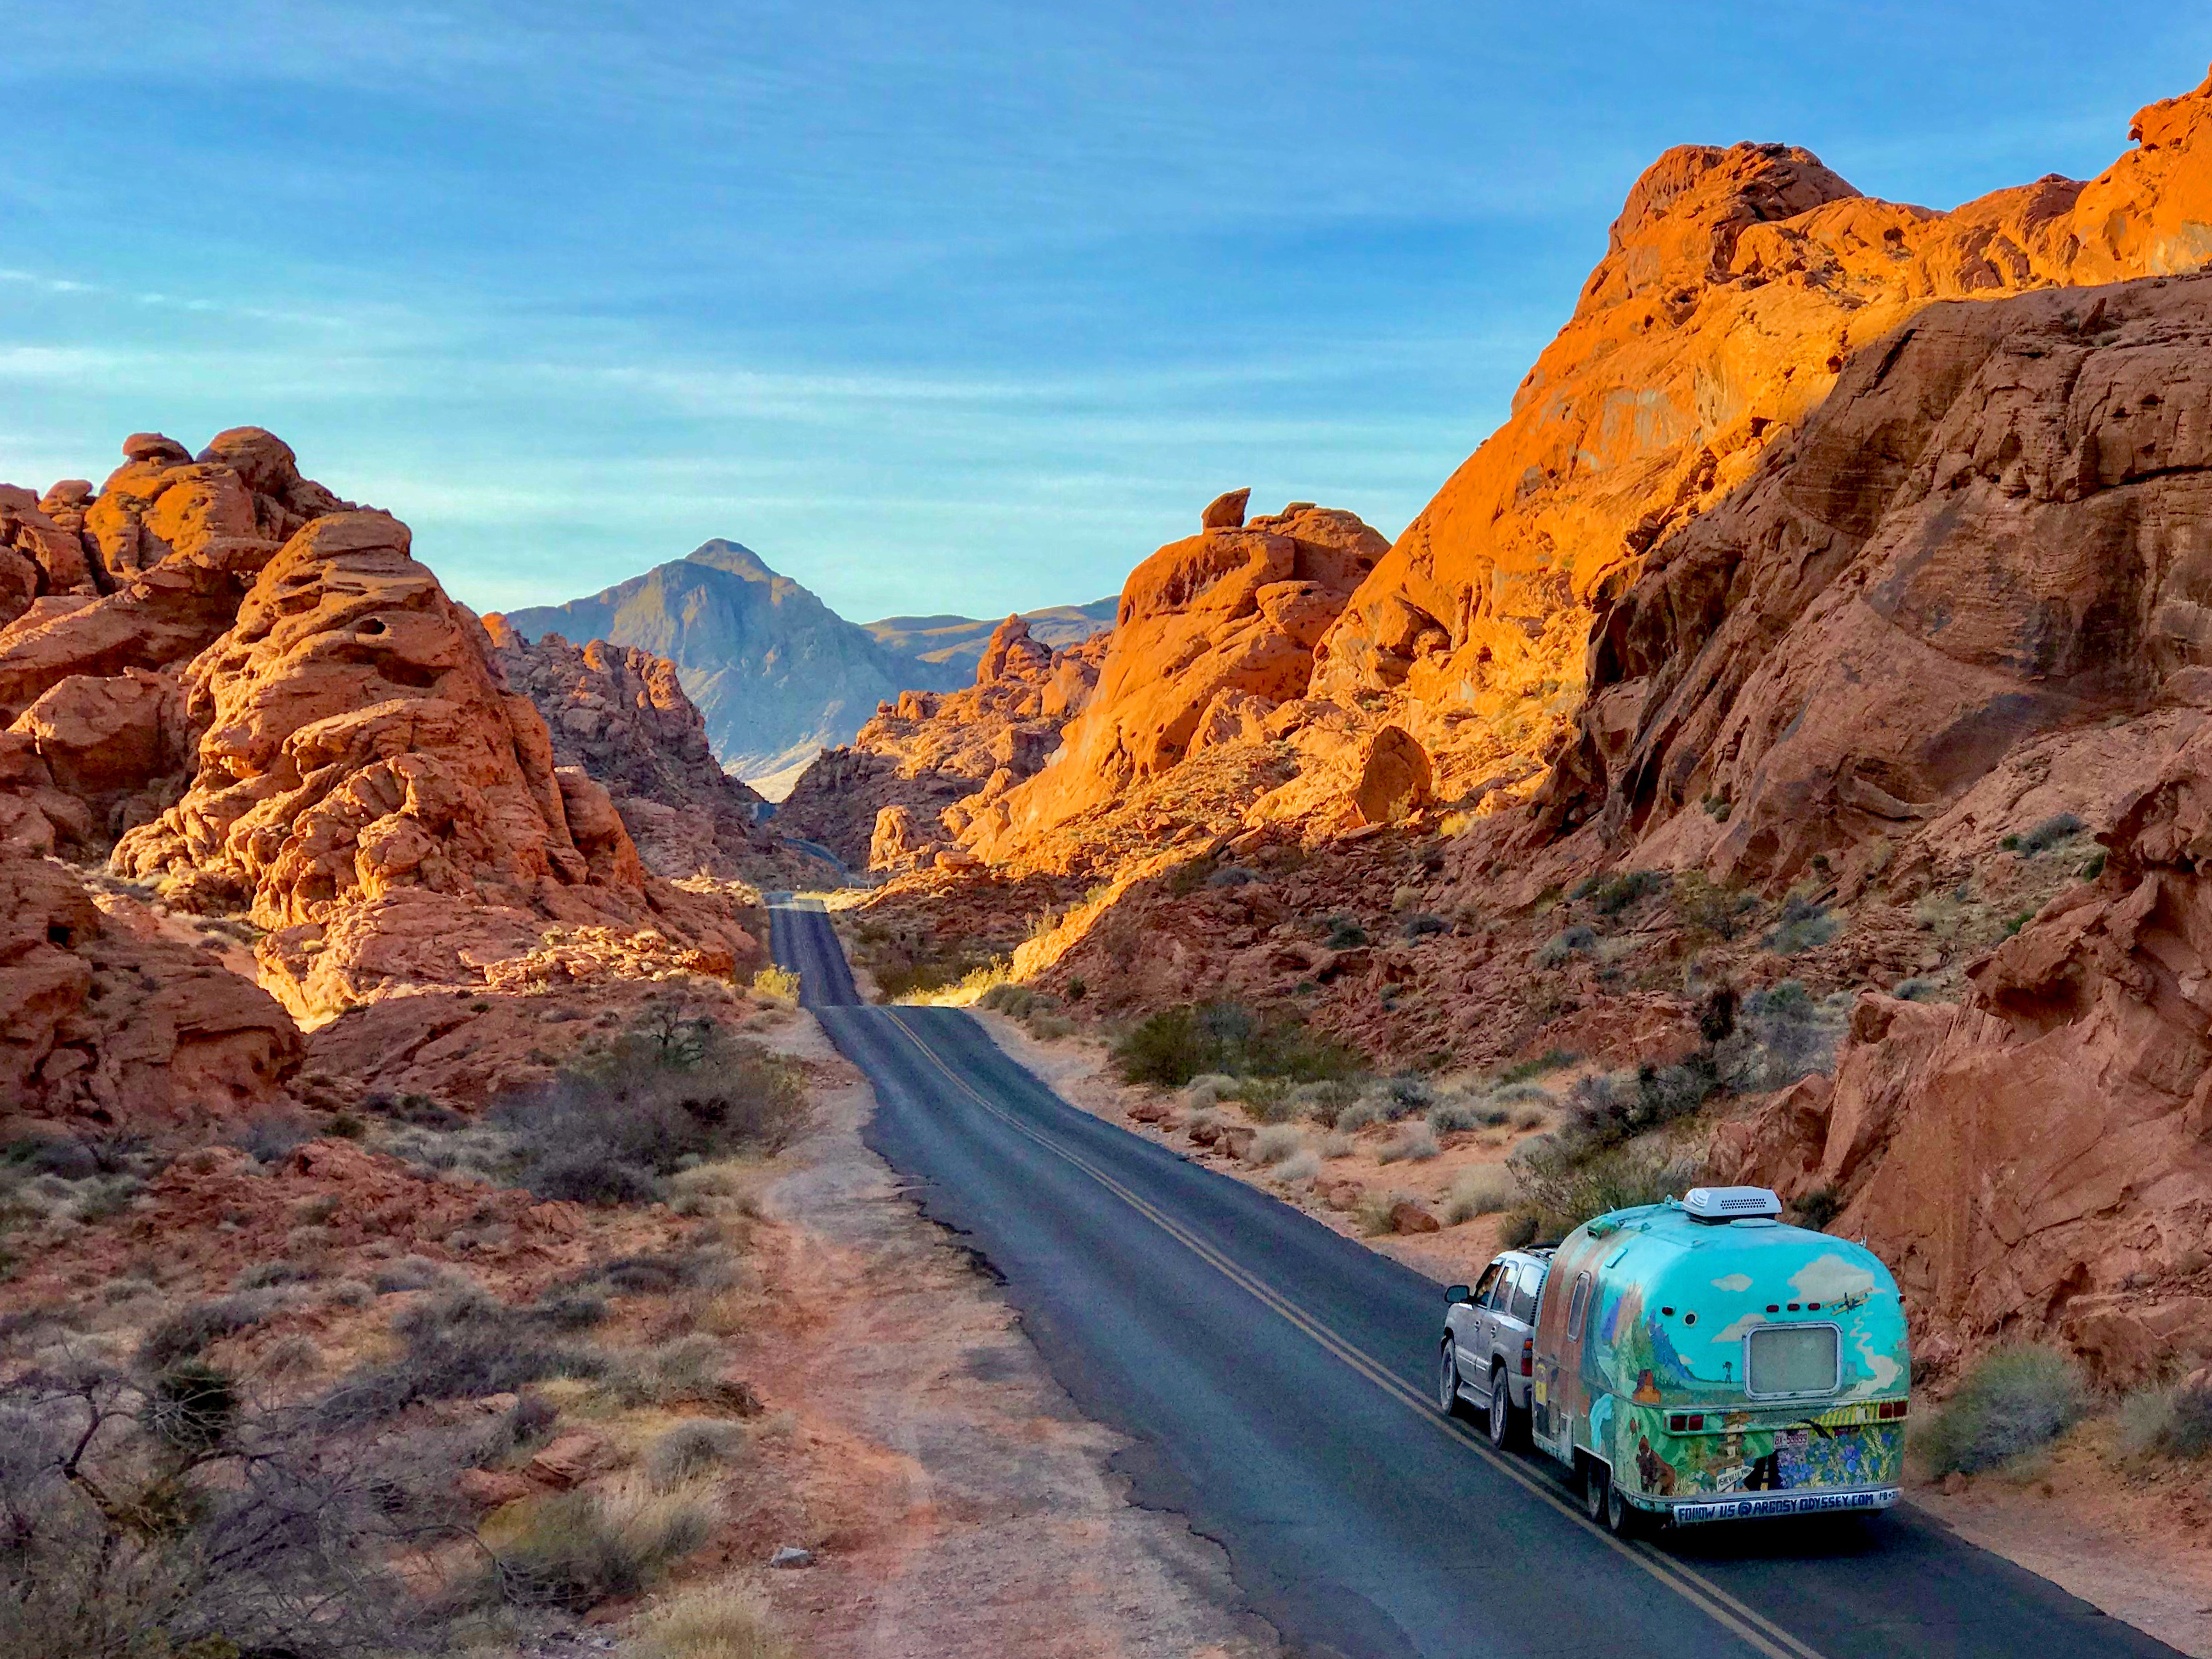 A colorful Airstream trailer is towed on a highway lined with red rock formations.